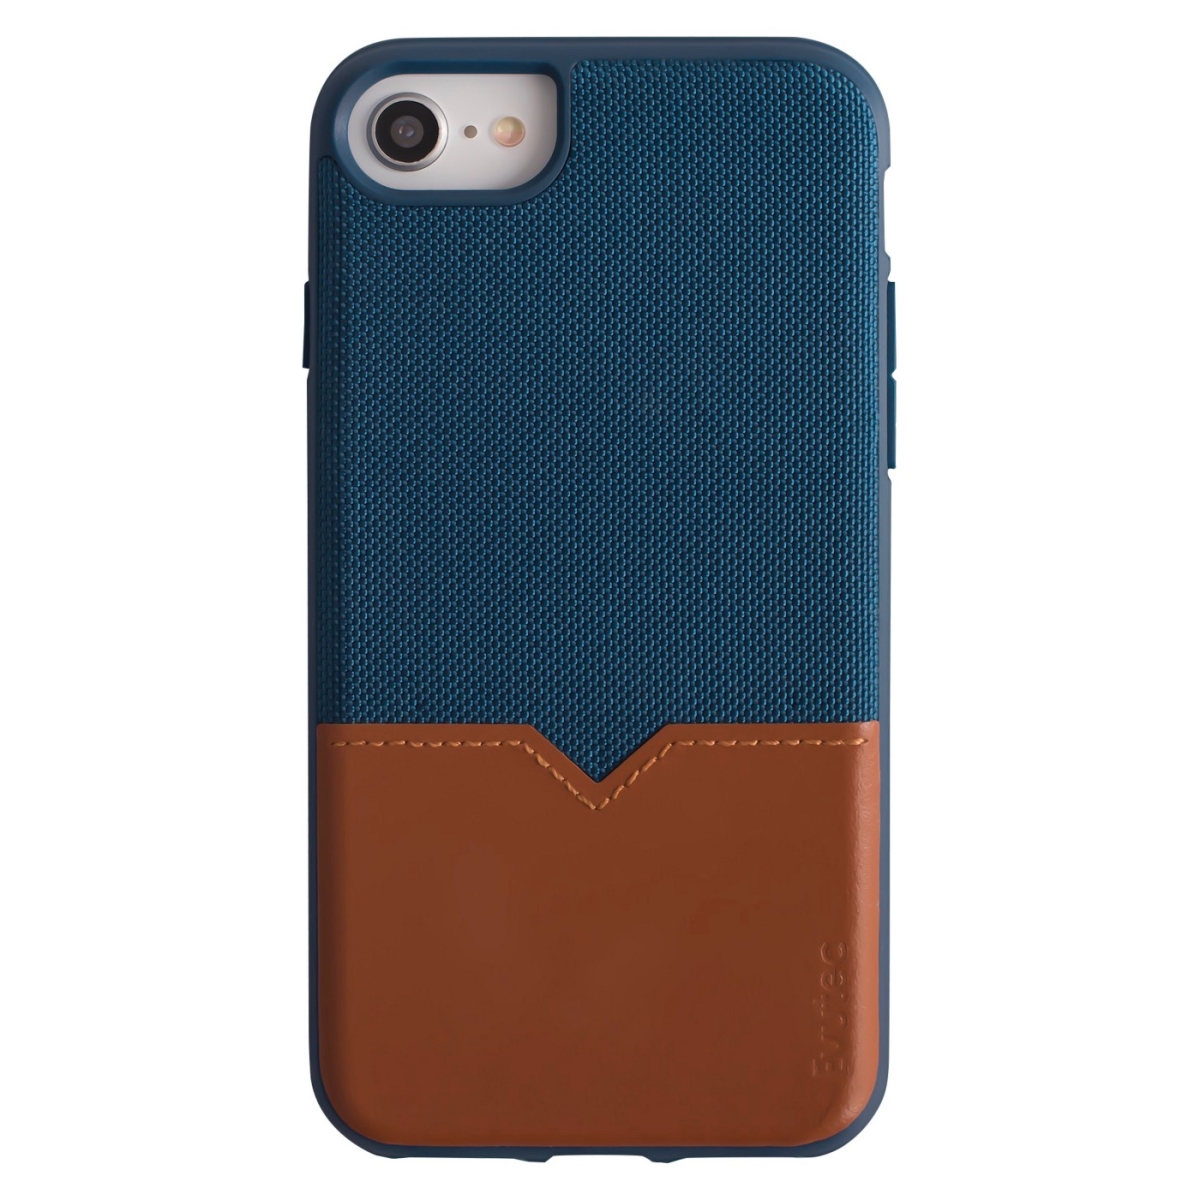 Picture of Evutec NH680MTD03 Iphone Case with Afix Mount - Blue